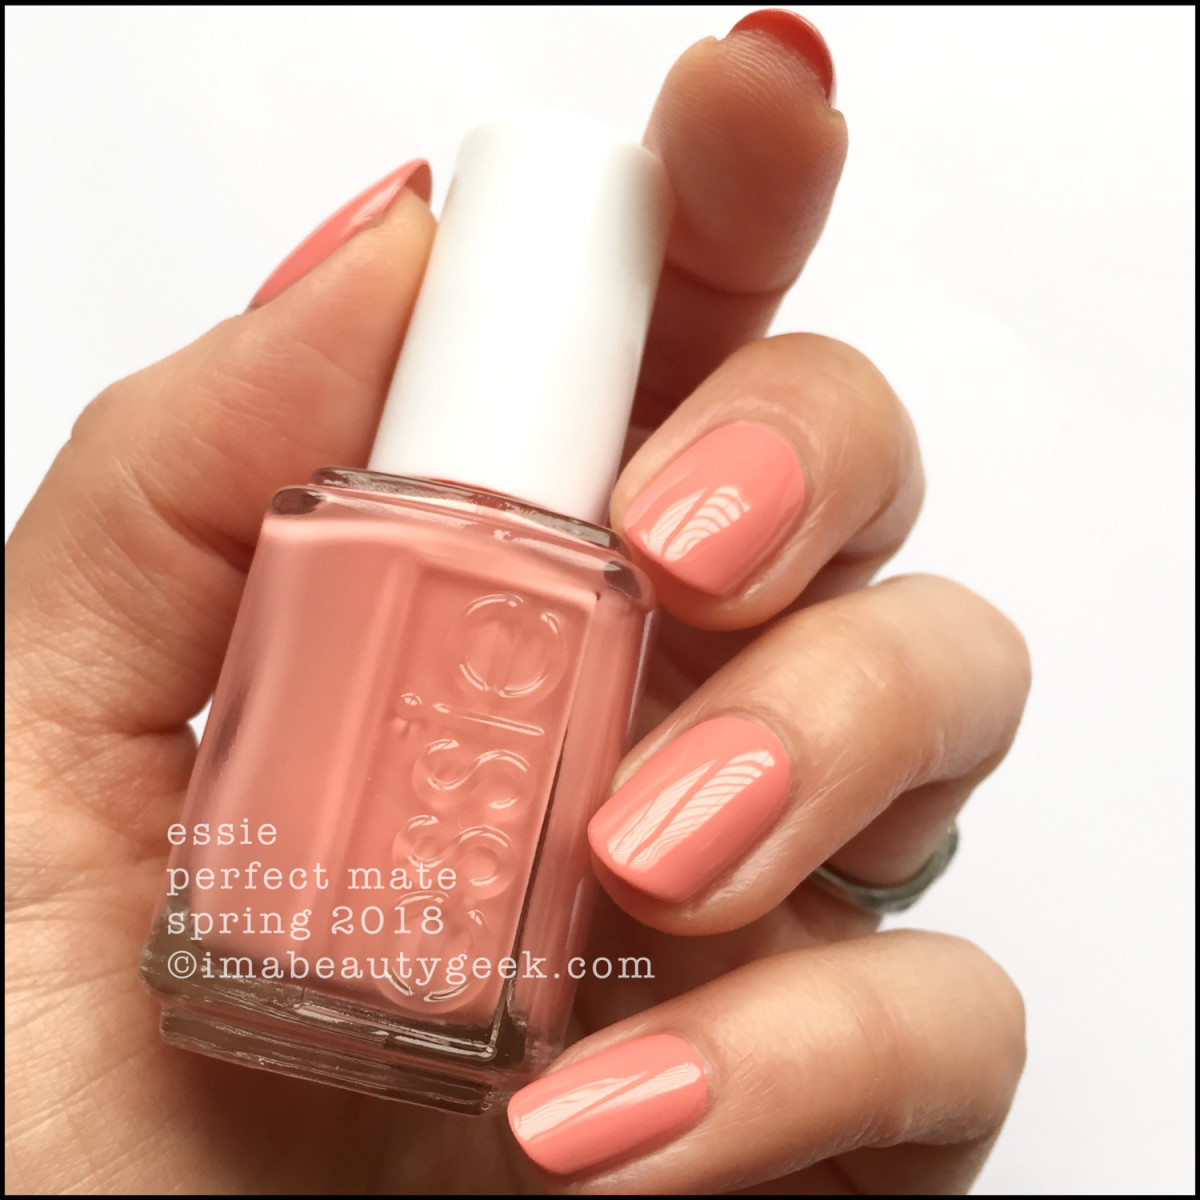 Essie Perfect Mate - Essie Spring 2018 Collection Swatches Review